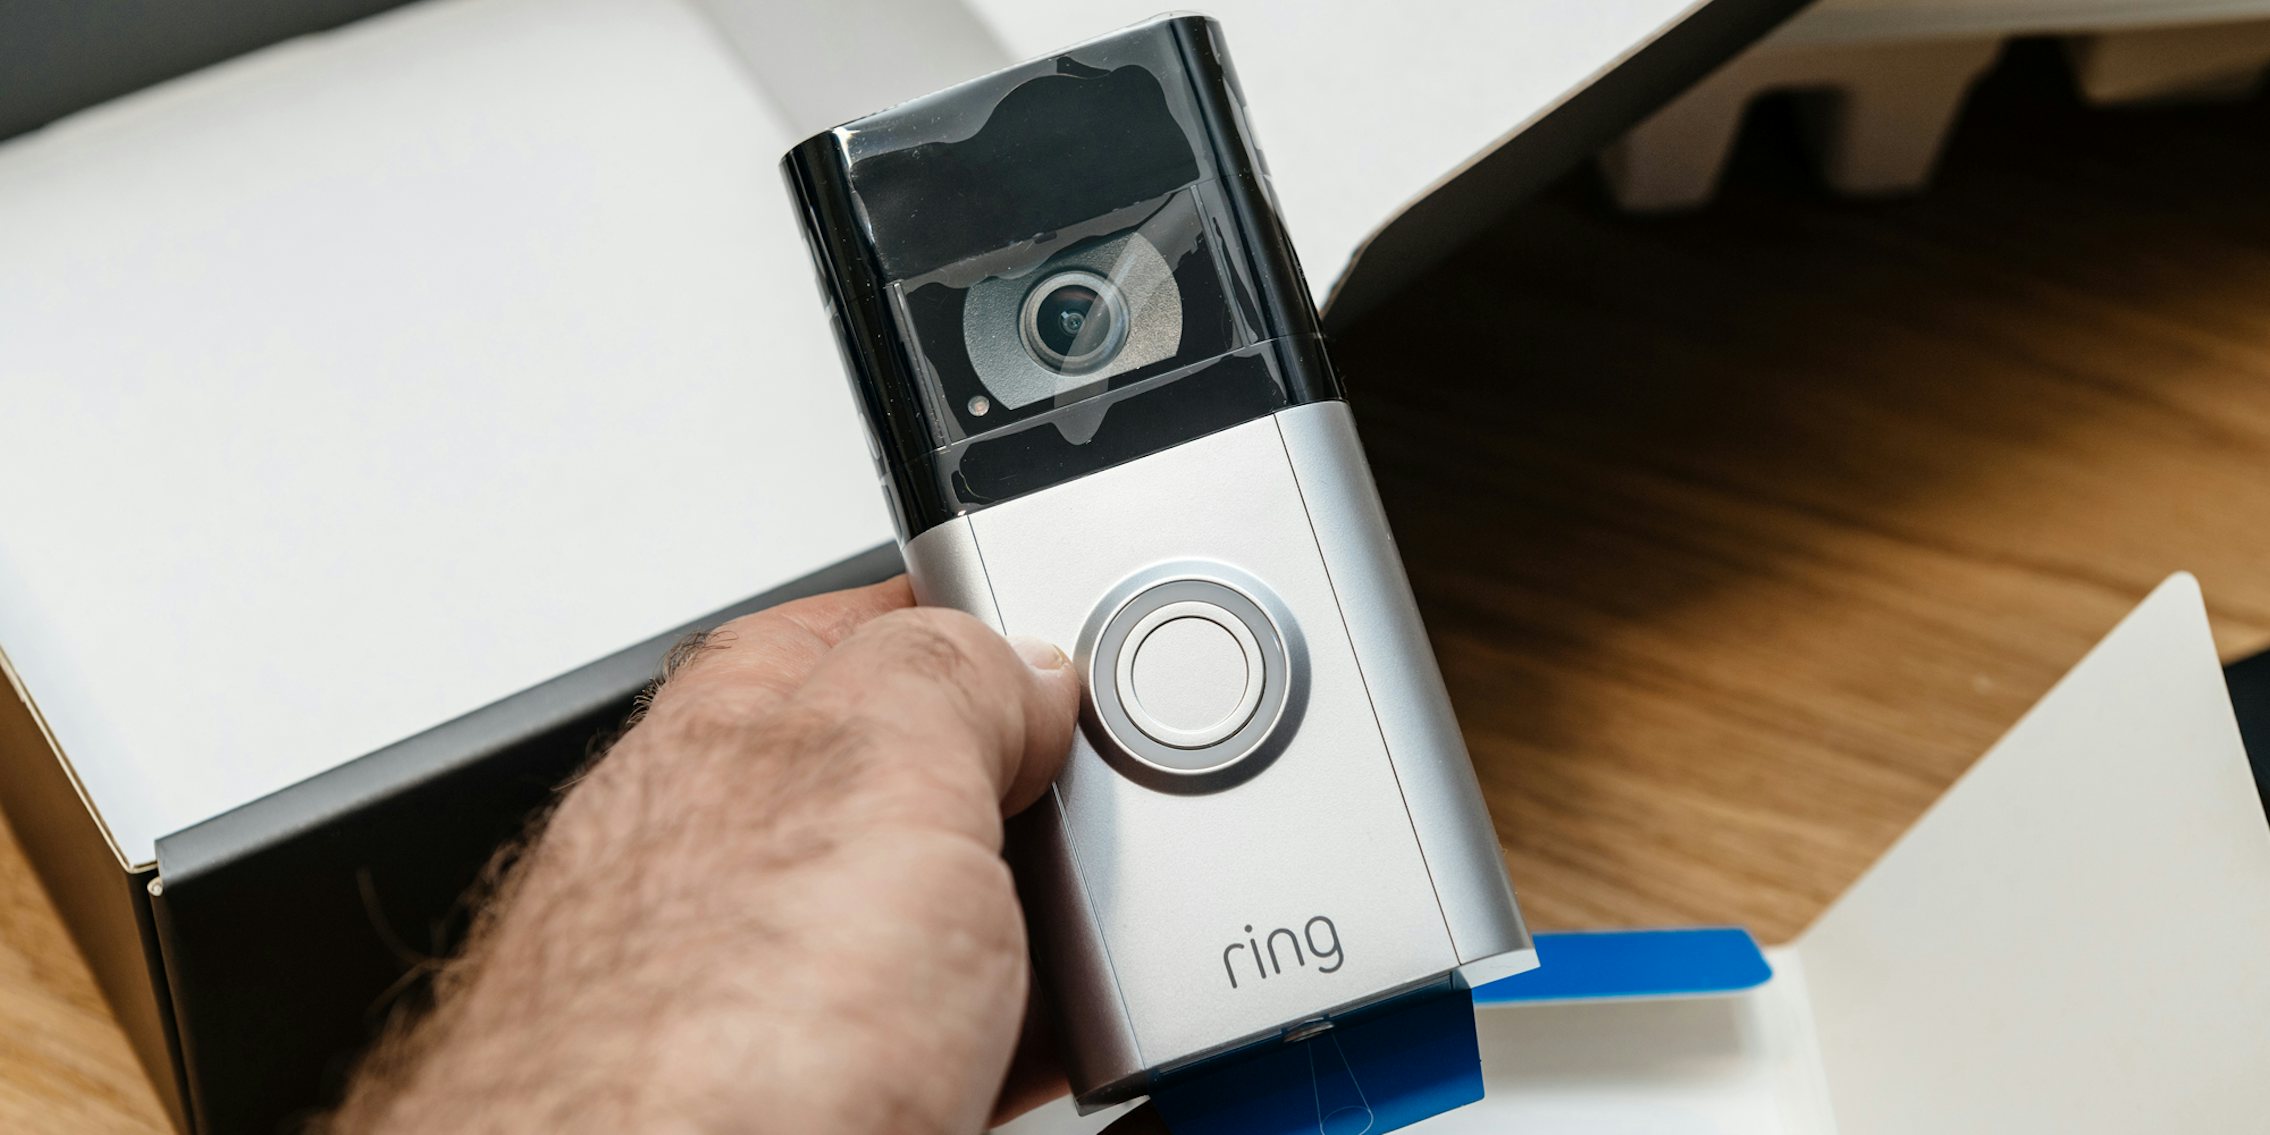 Amazon Ring camera in hand in front of packaging on wooden surface